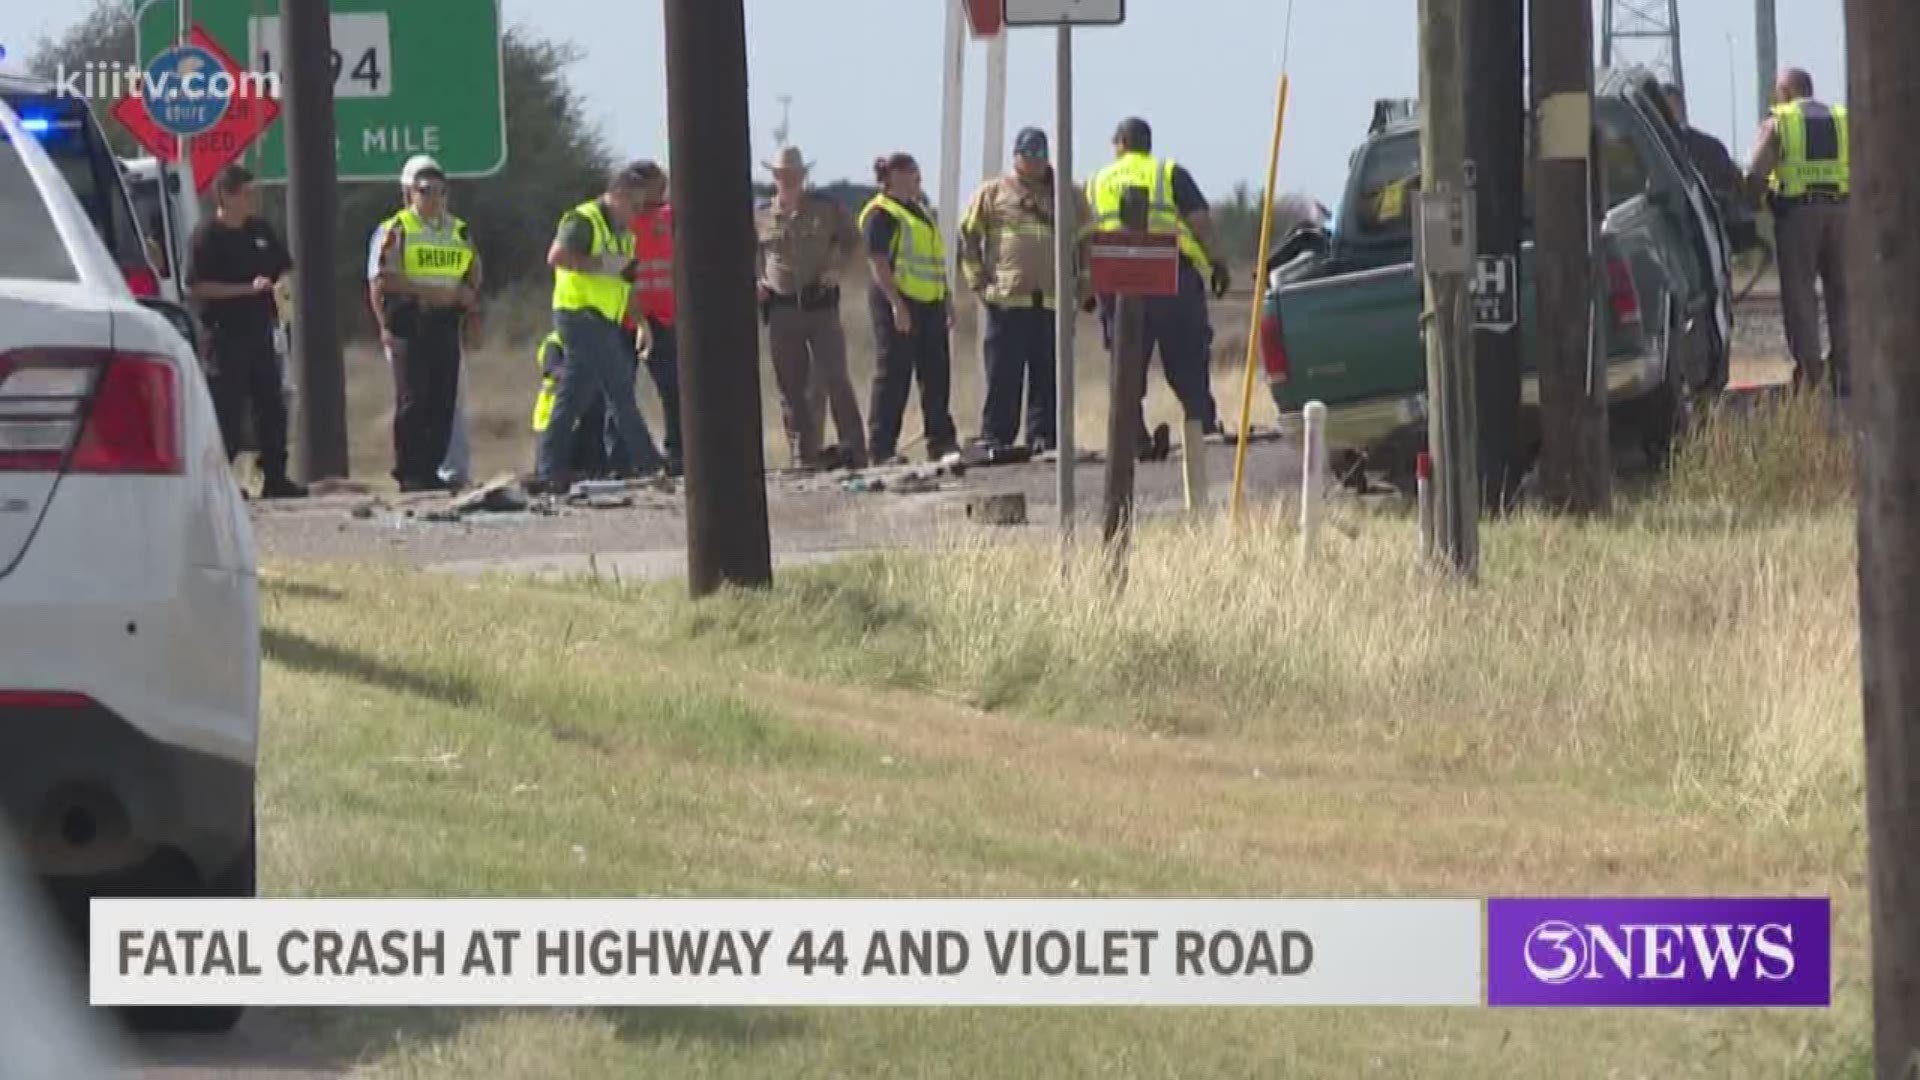 One driver was killed in a crash just before 1 p.m. Wednesday between Corpus Christi and Robstown on Highway 44 and Violet Road.